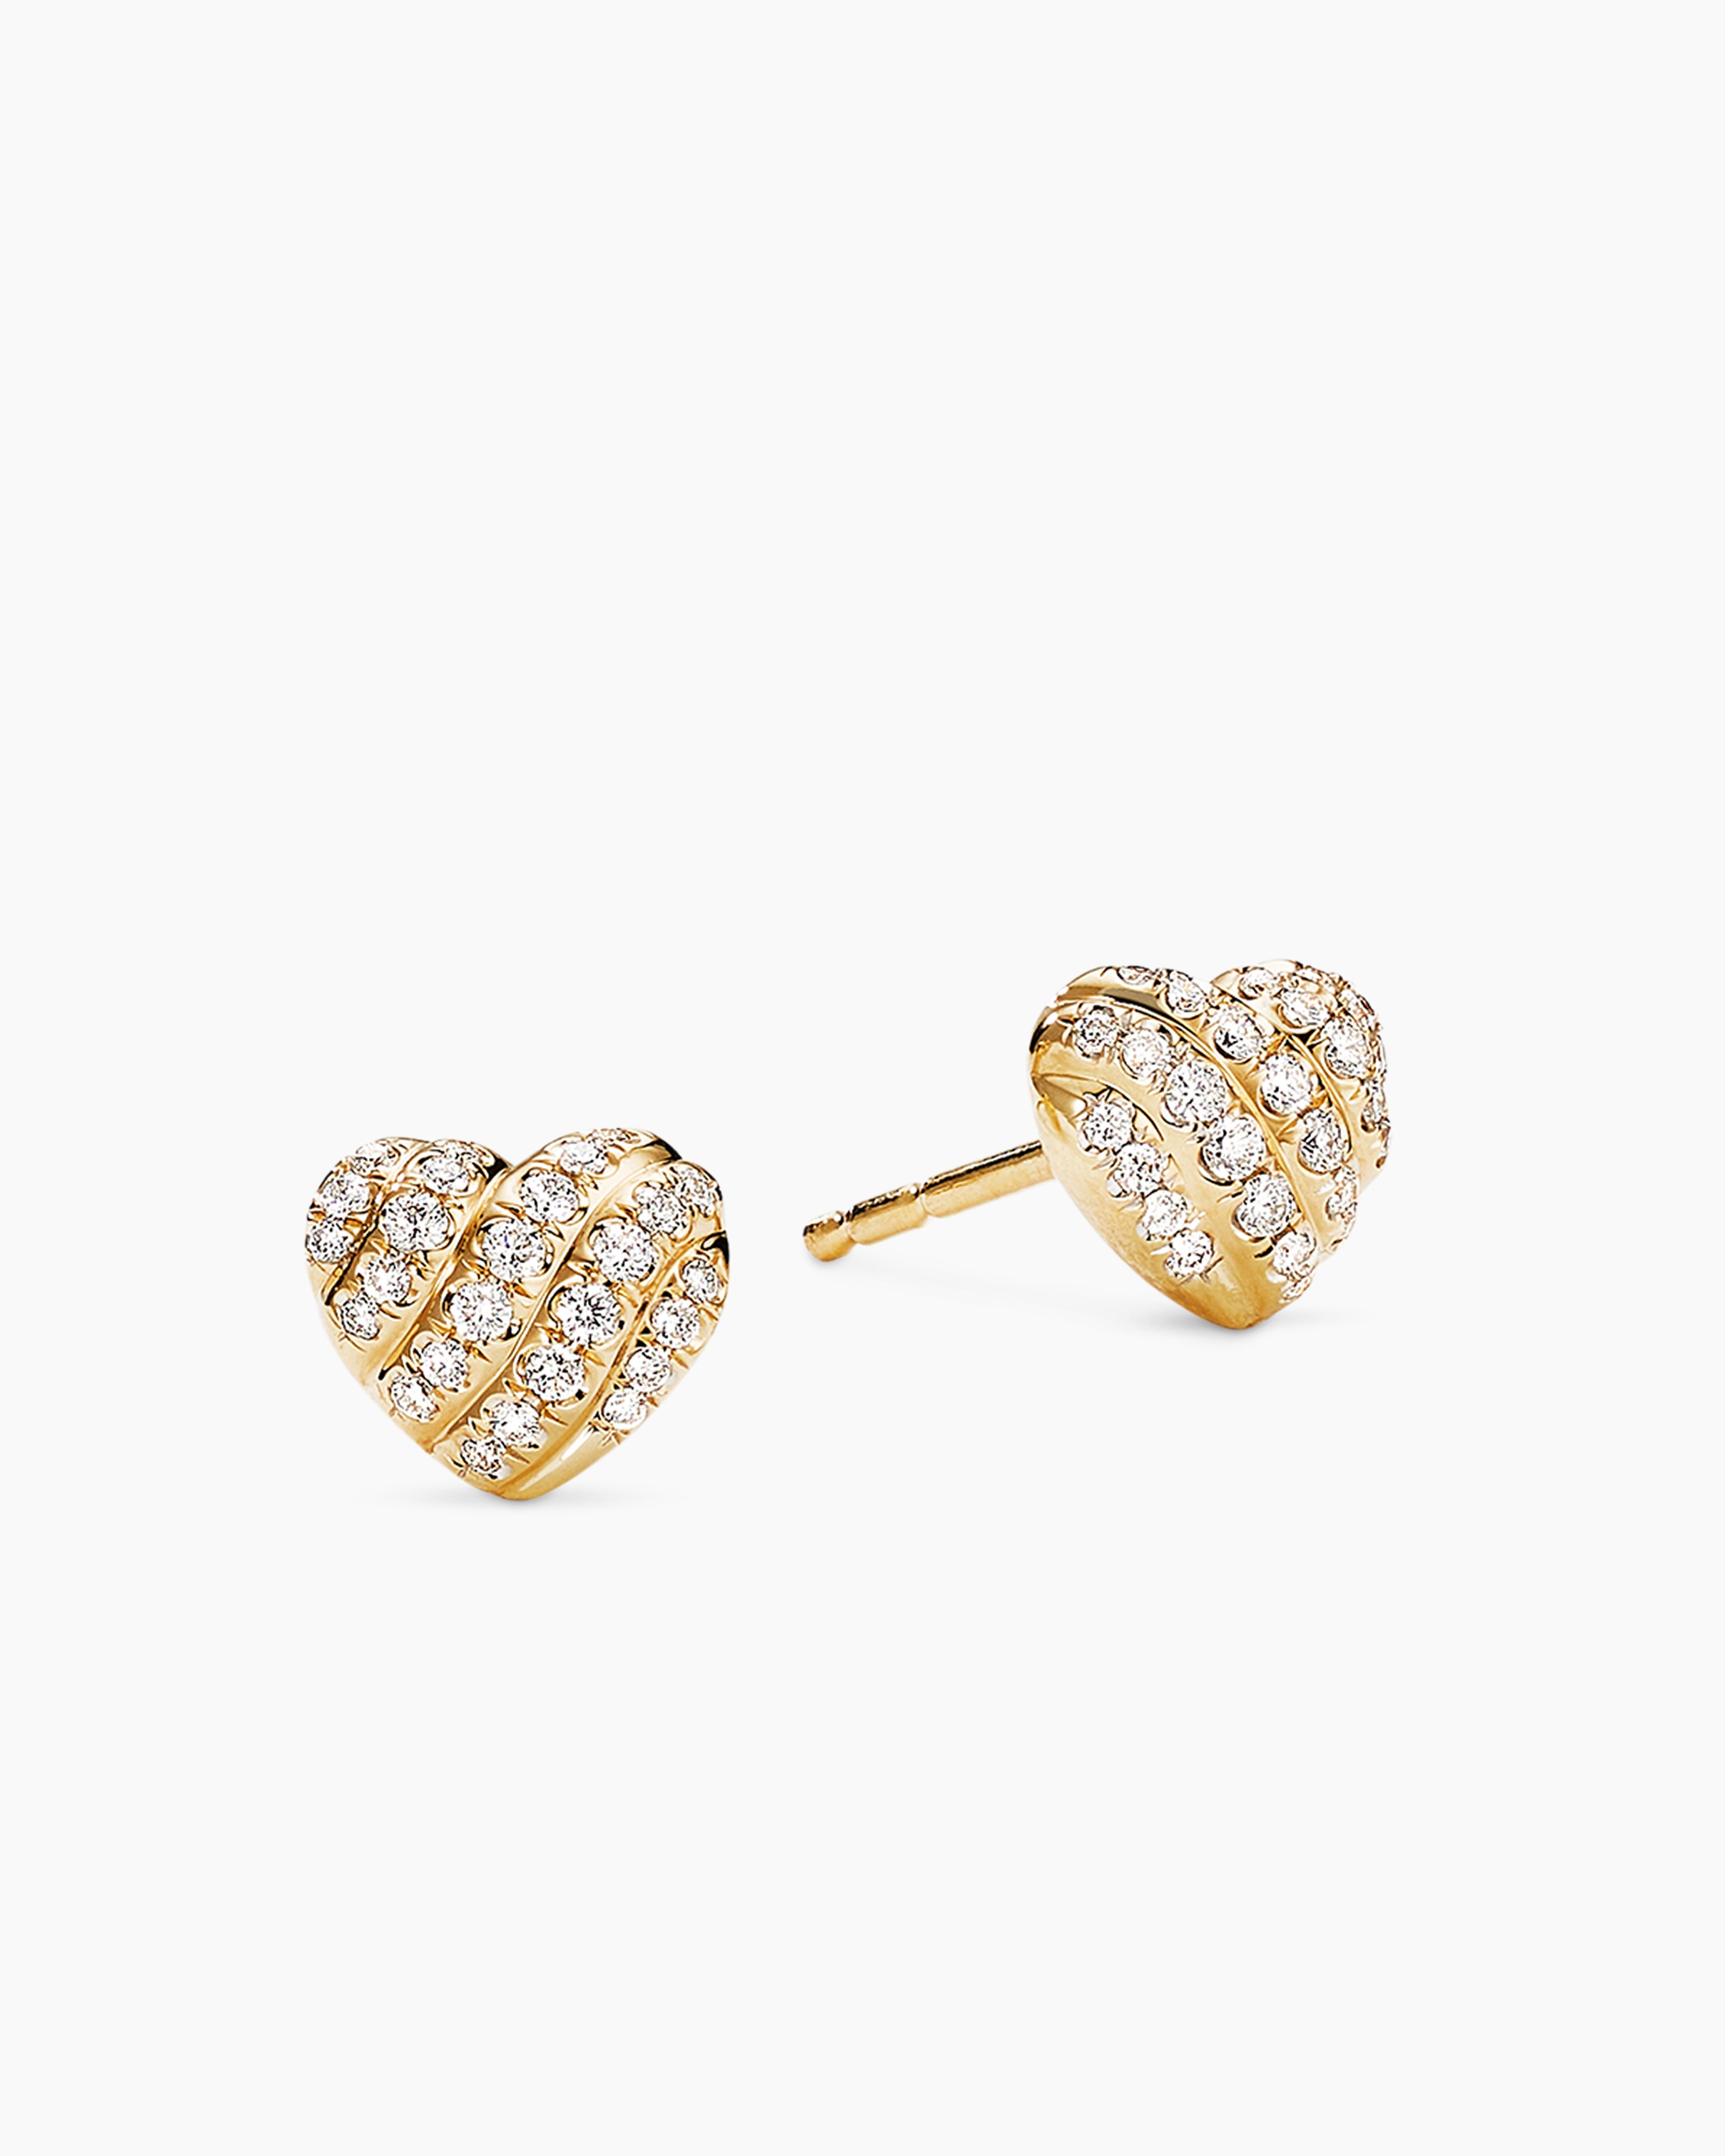 8mm Pave Set Stud Earrings in Yellow Gold – The GLD Shop